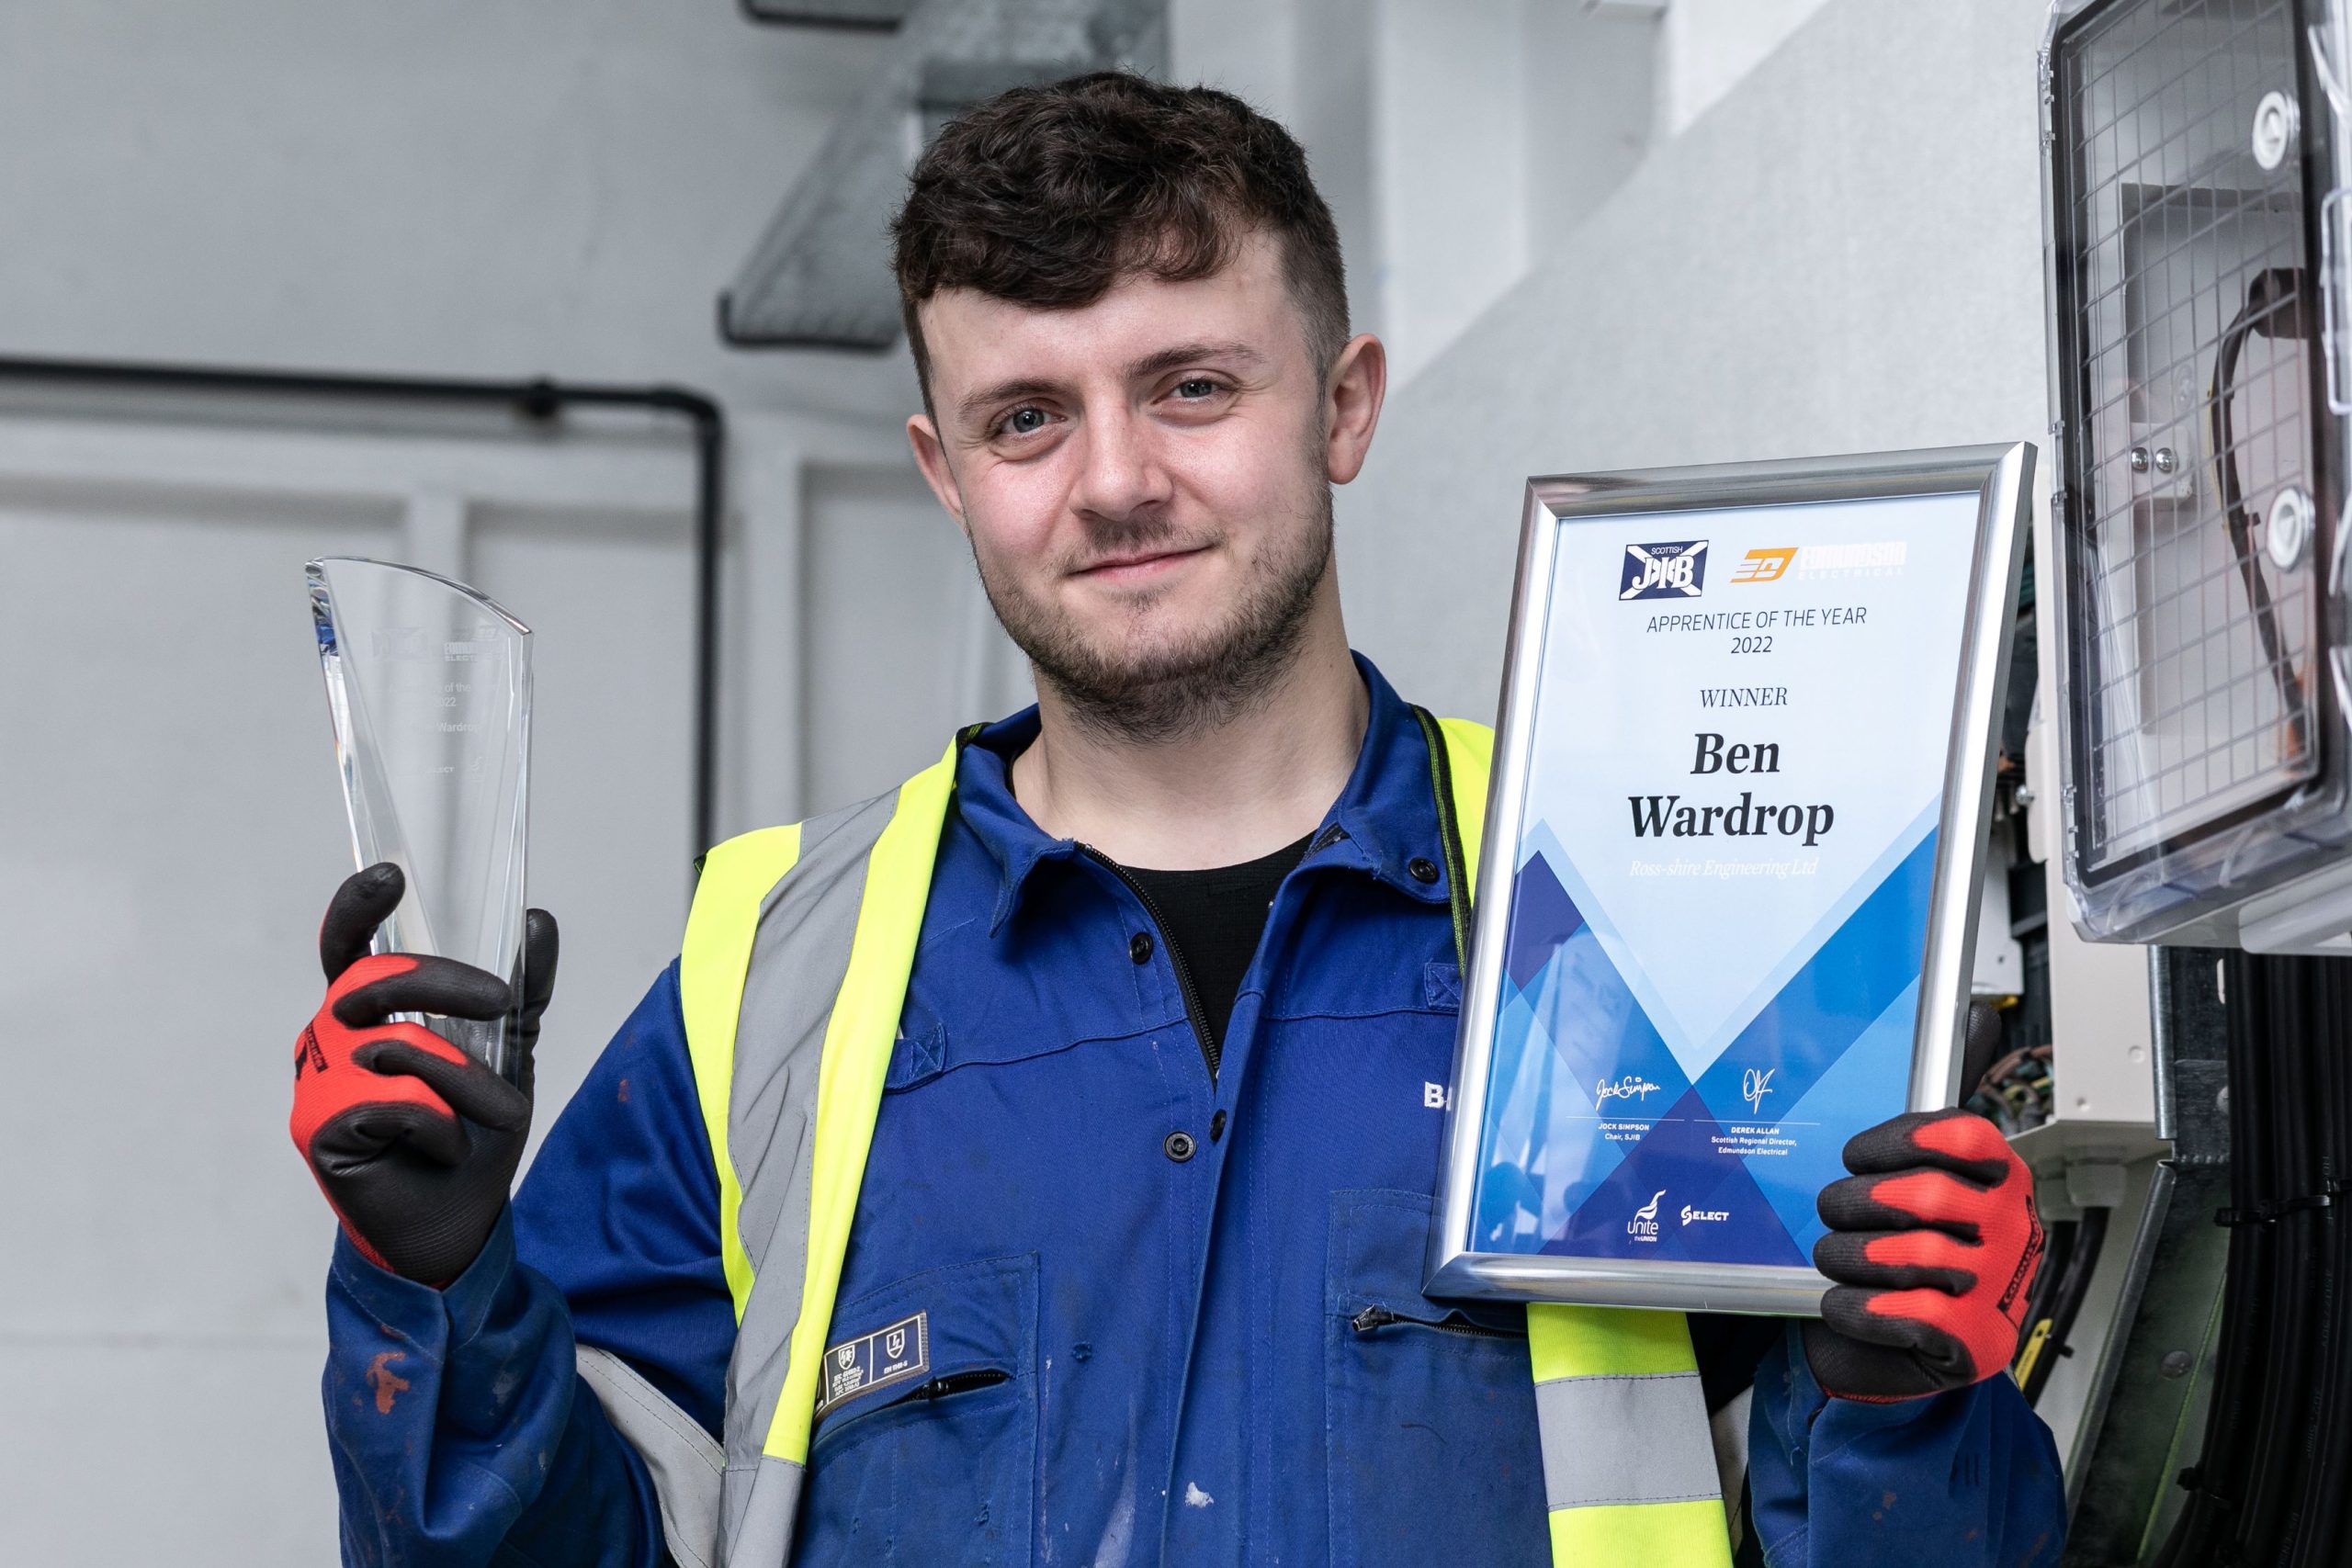 2022 SJIB Apprentice of the Year winner Ben Wardrop scaled 1 1 Scotland's brightest young sparks are rewarded for their talent as John and Ben are crowned SJIB Apprentices of the Year, in conjunction with Edmundson Electrical